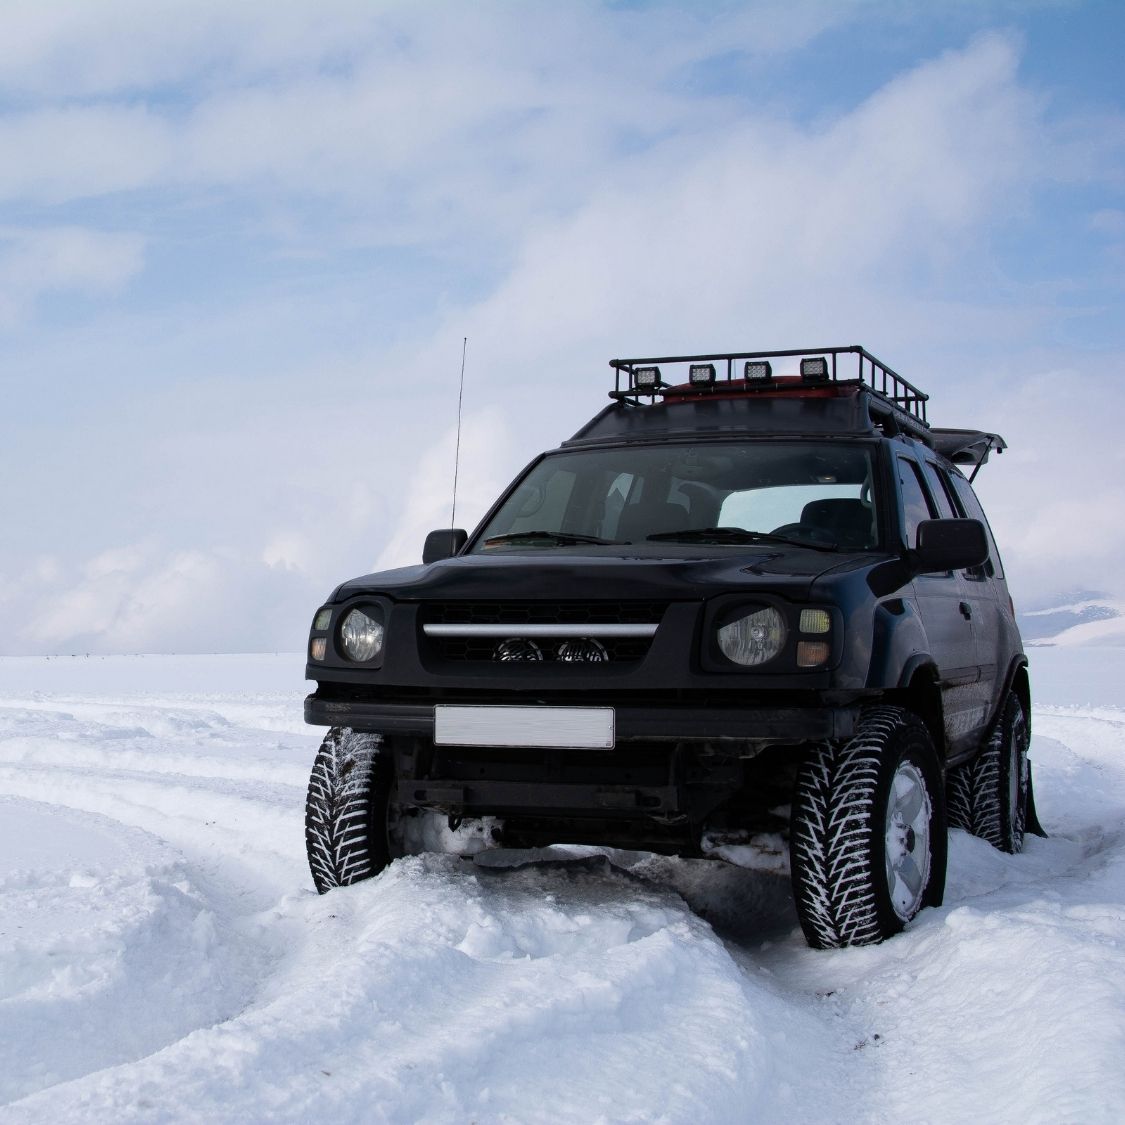 What To Know Before Off-Roading in the Snow